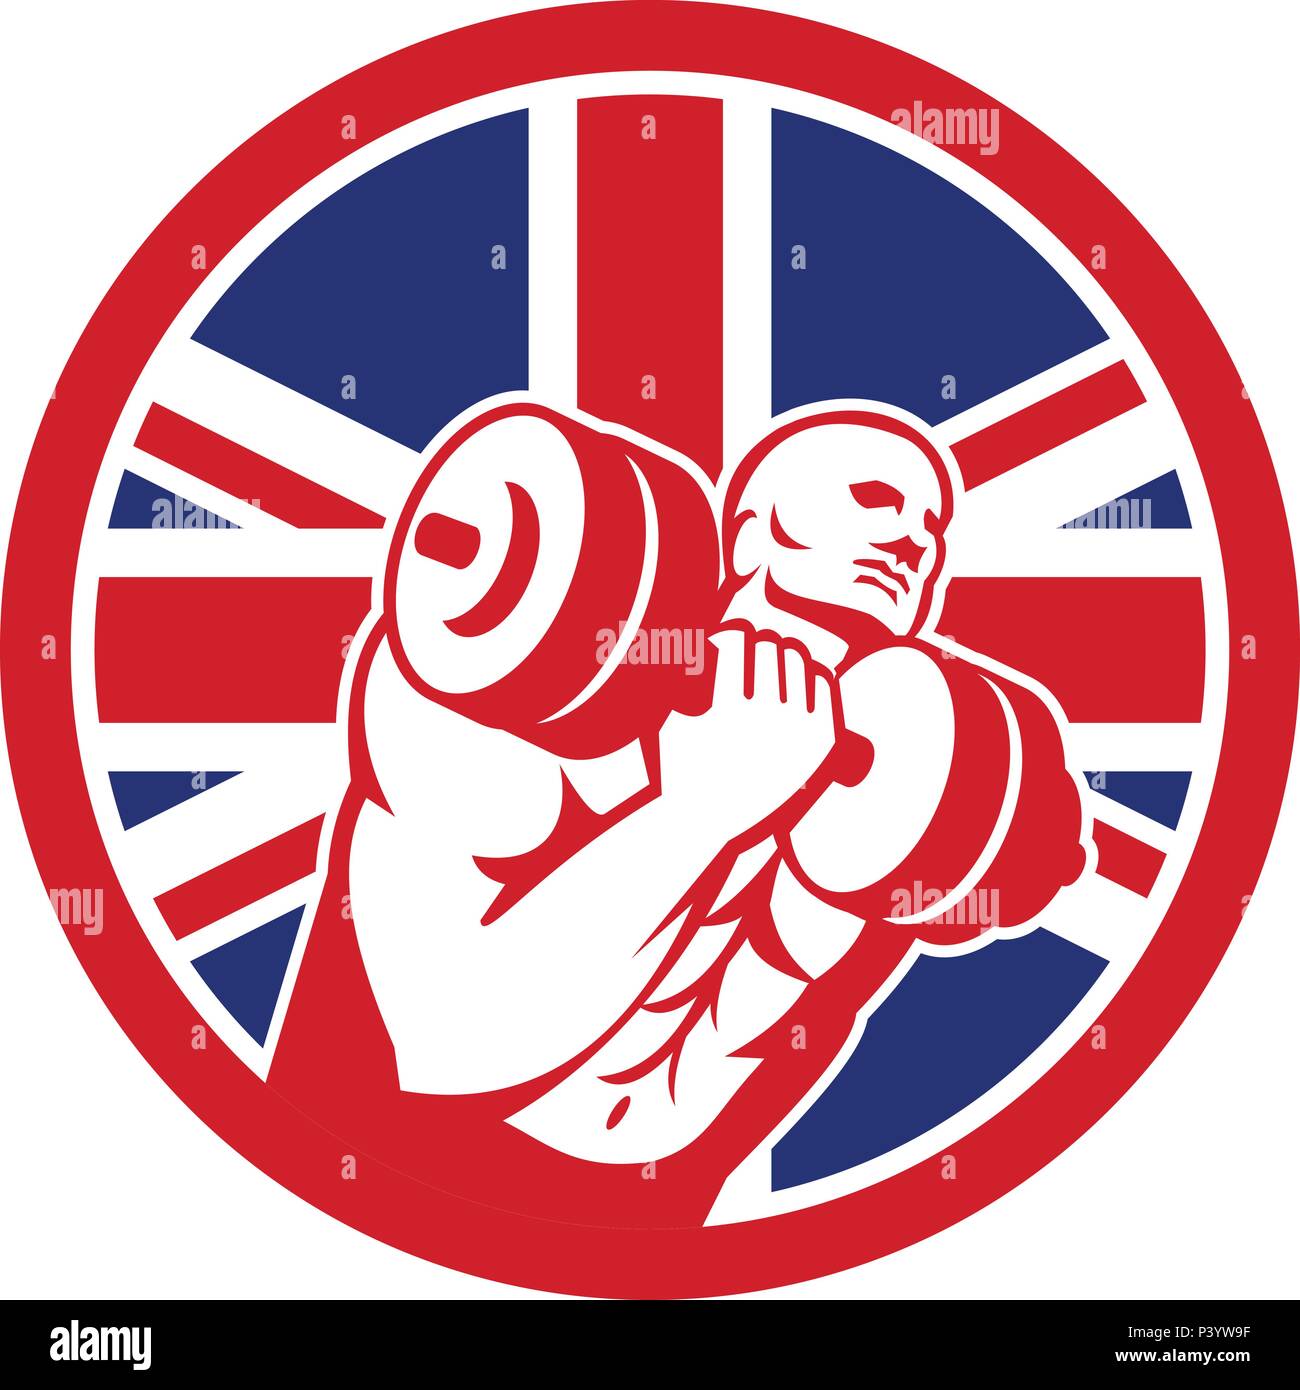 Icon retro style illustration of a British fitness gym circuit with athlete lifting dumbbell and United Kingdom UK, Great Britain Union Jack flag set  Stock Vector